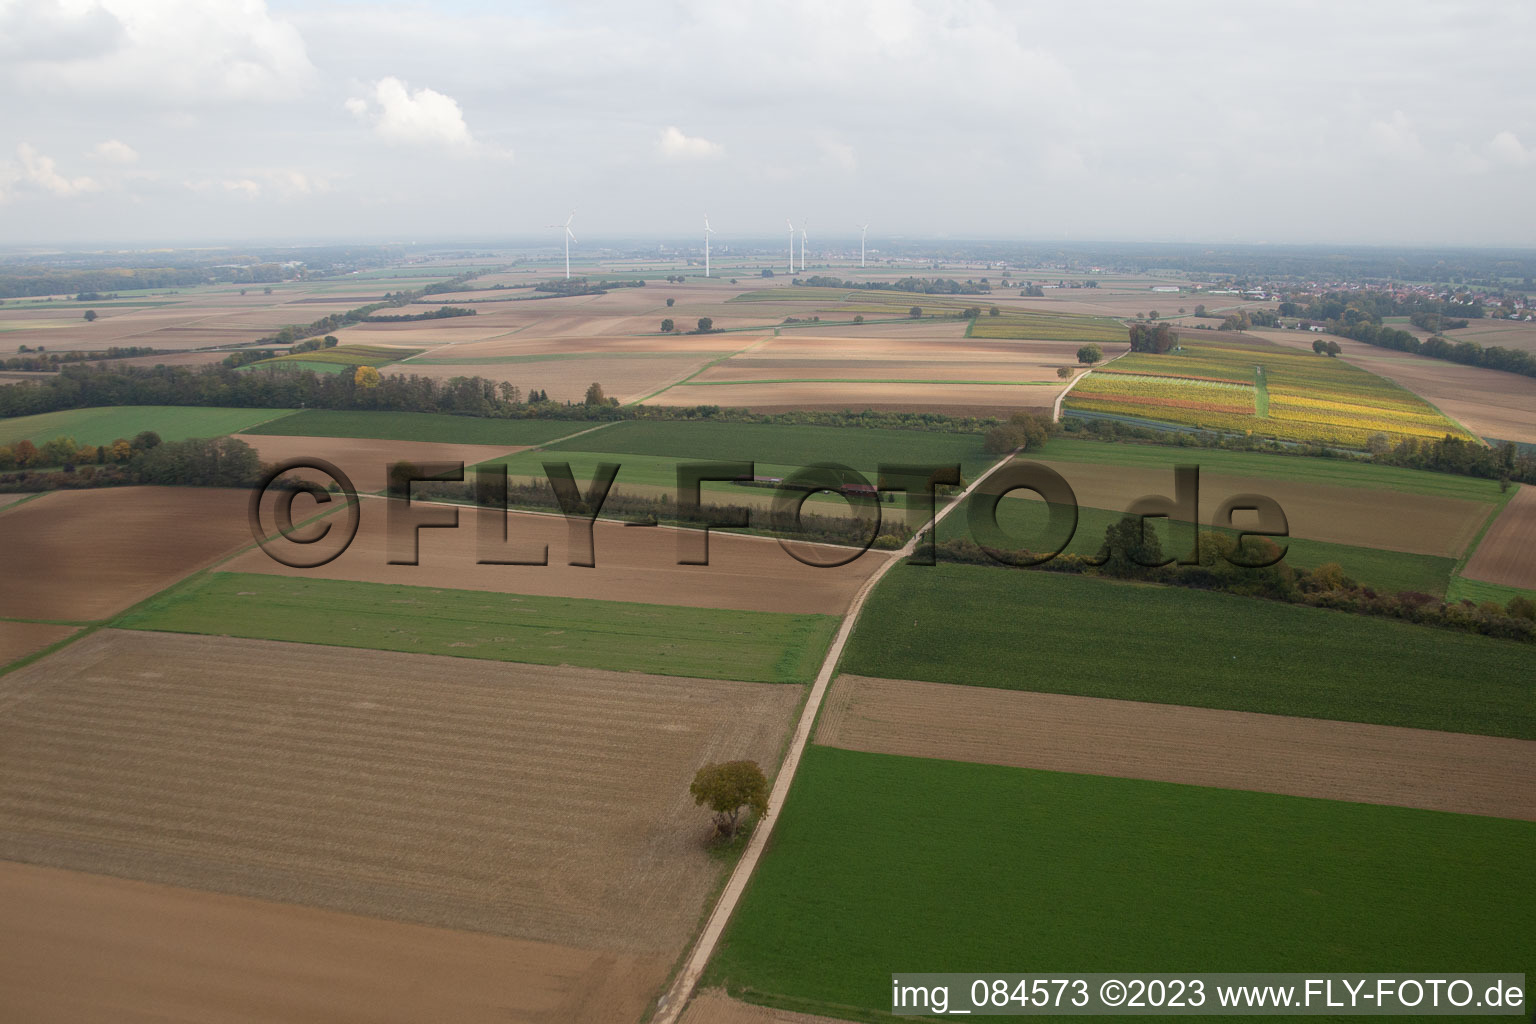 Model airfield in Freckenfeld in the state Rhineland-Palatinate, Germany from the plane